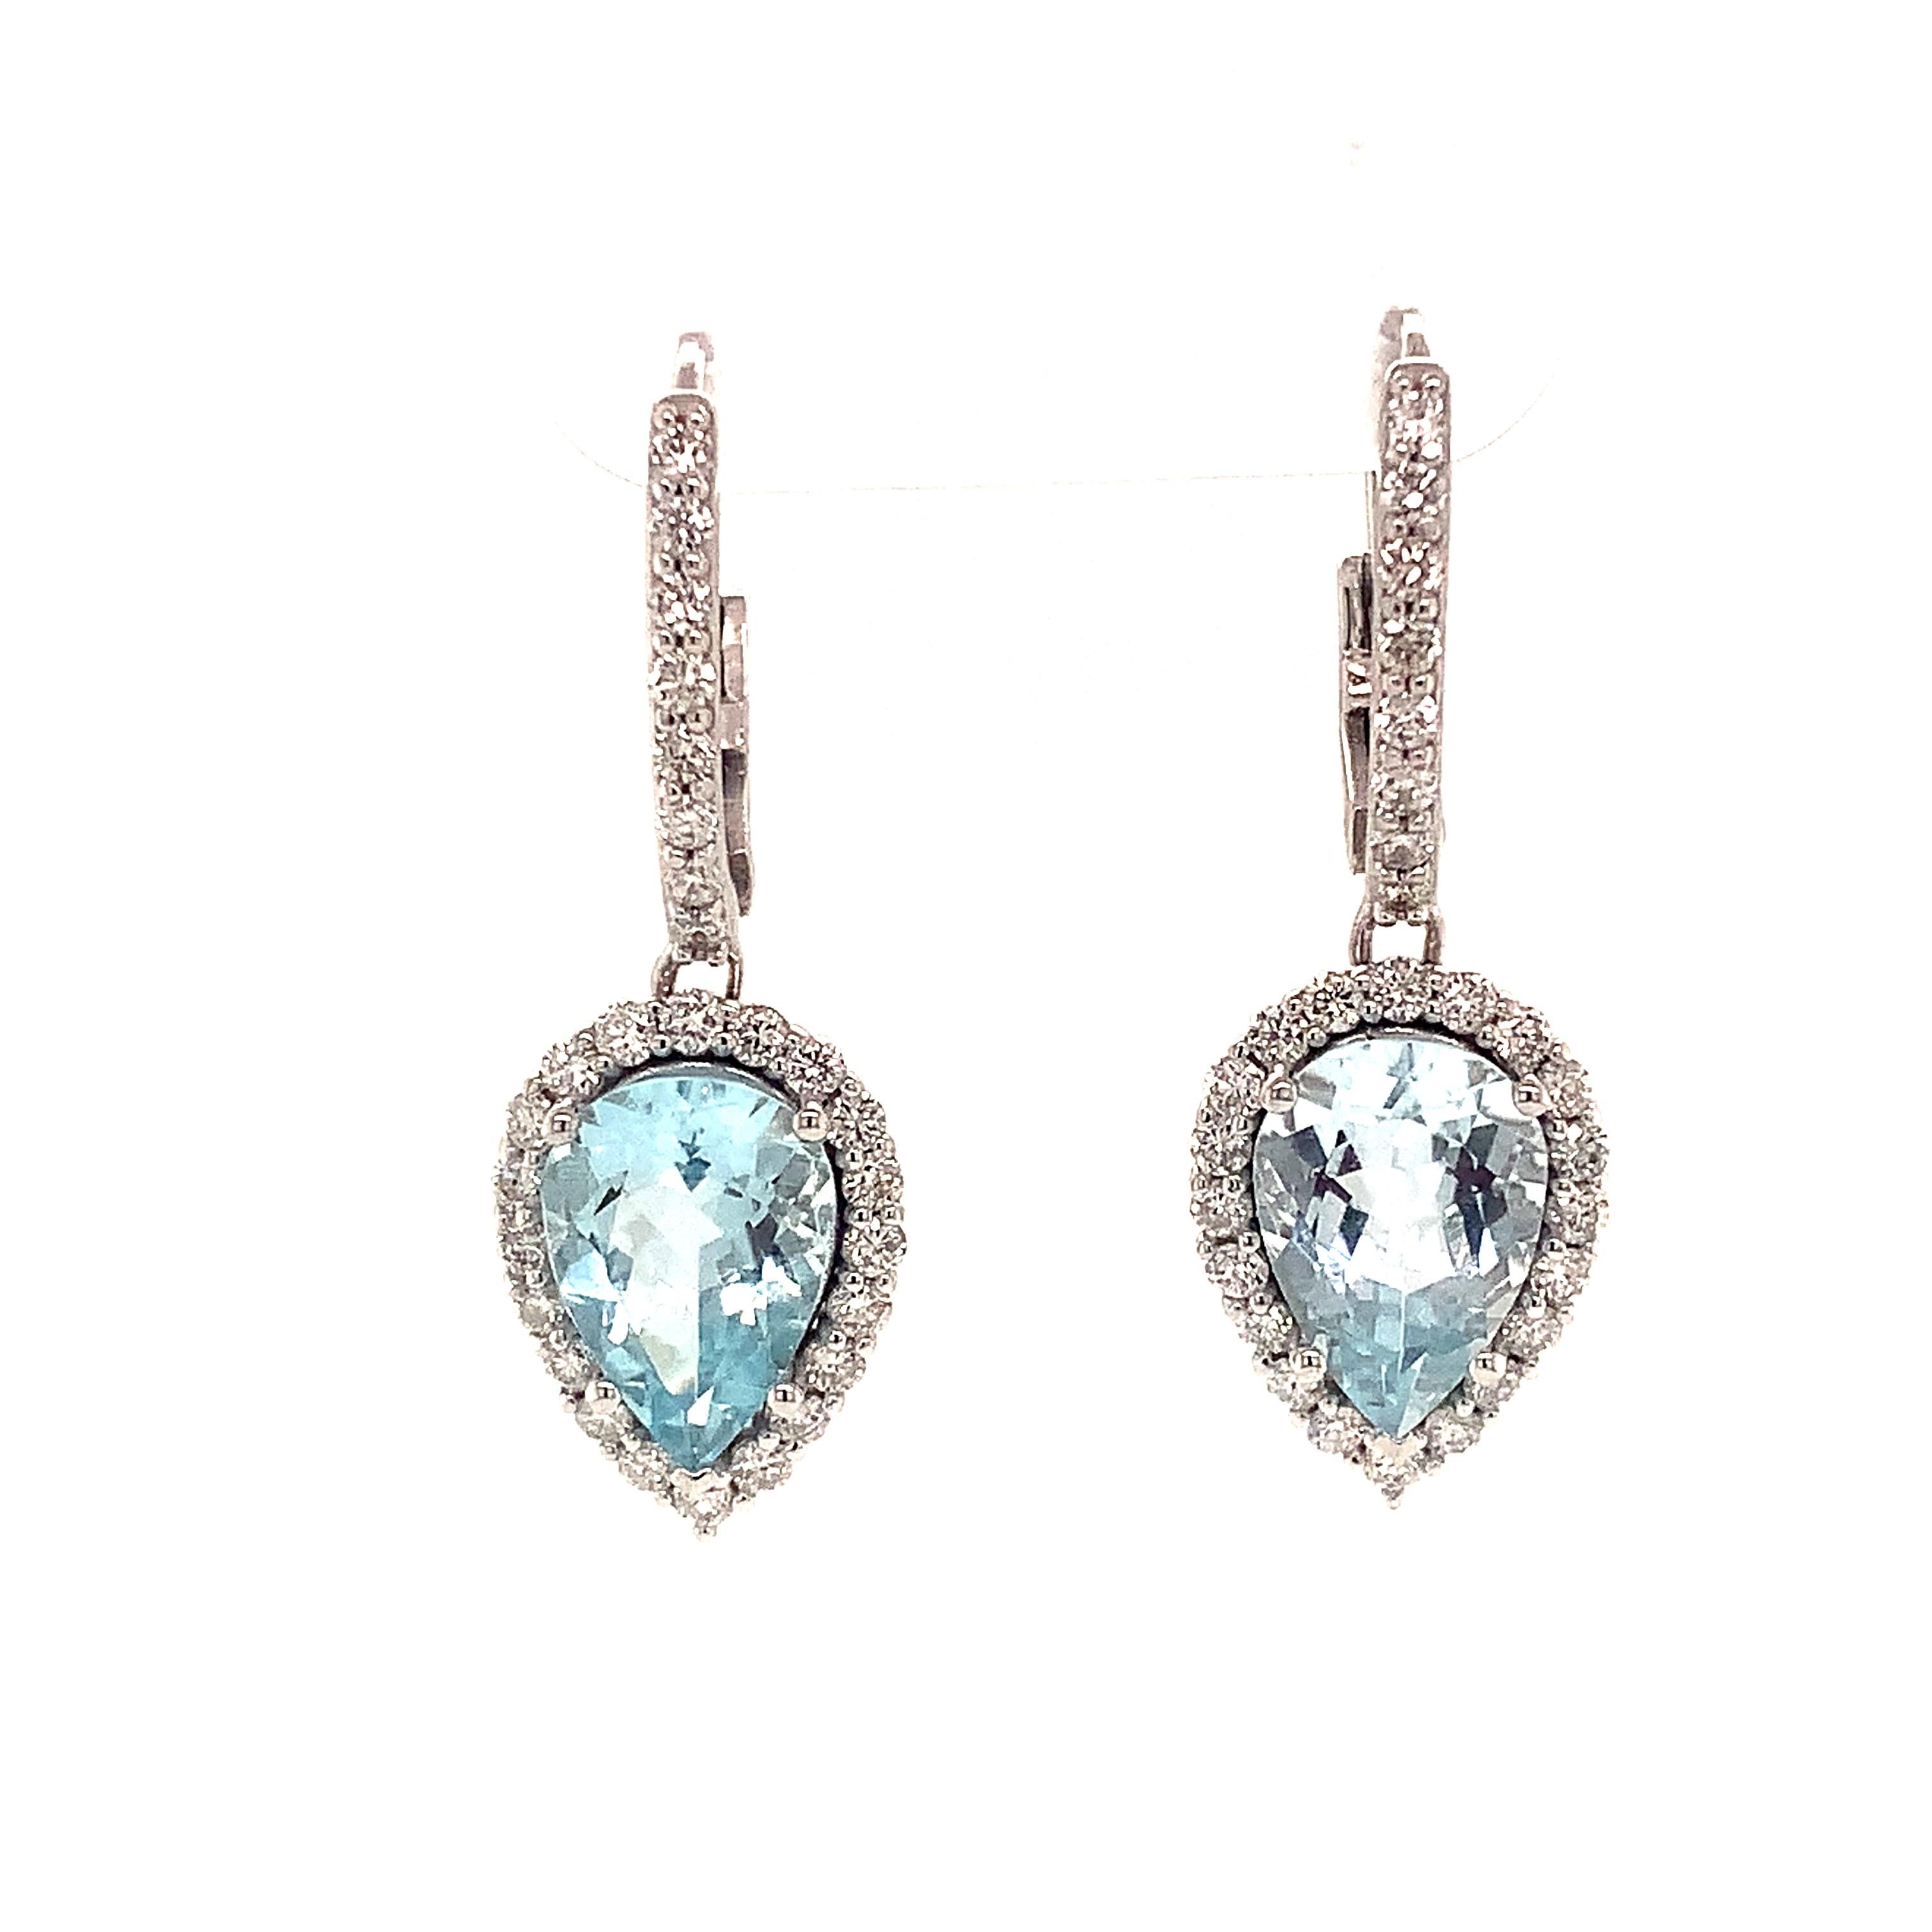 Natural Aquamarine Diamond Earrings 14k Gold 3.61 Tcw Certified In New Condition For Sale In Brooklyn, NY